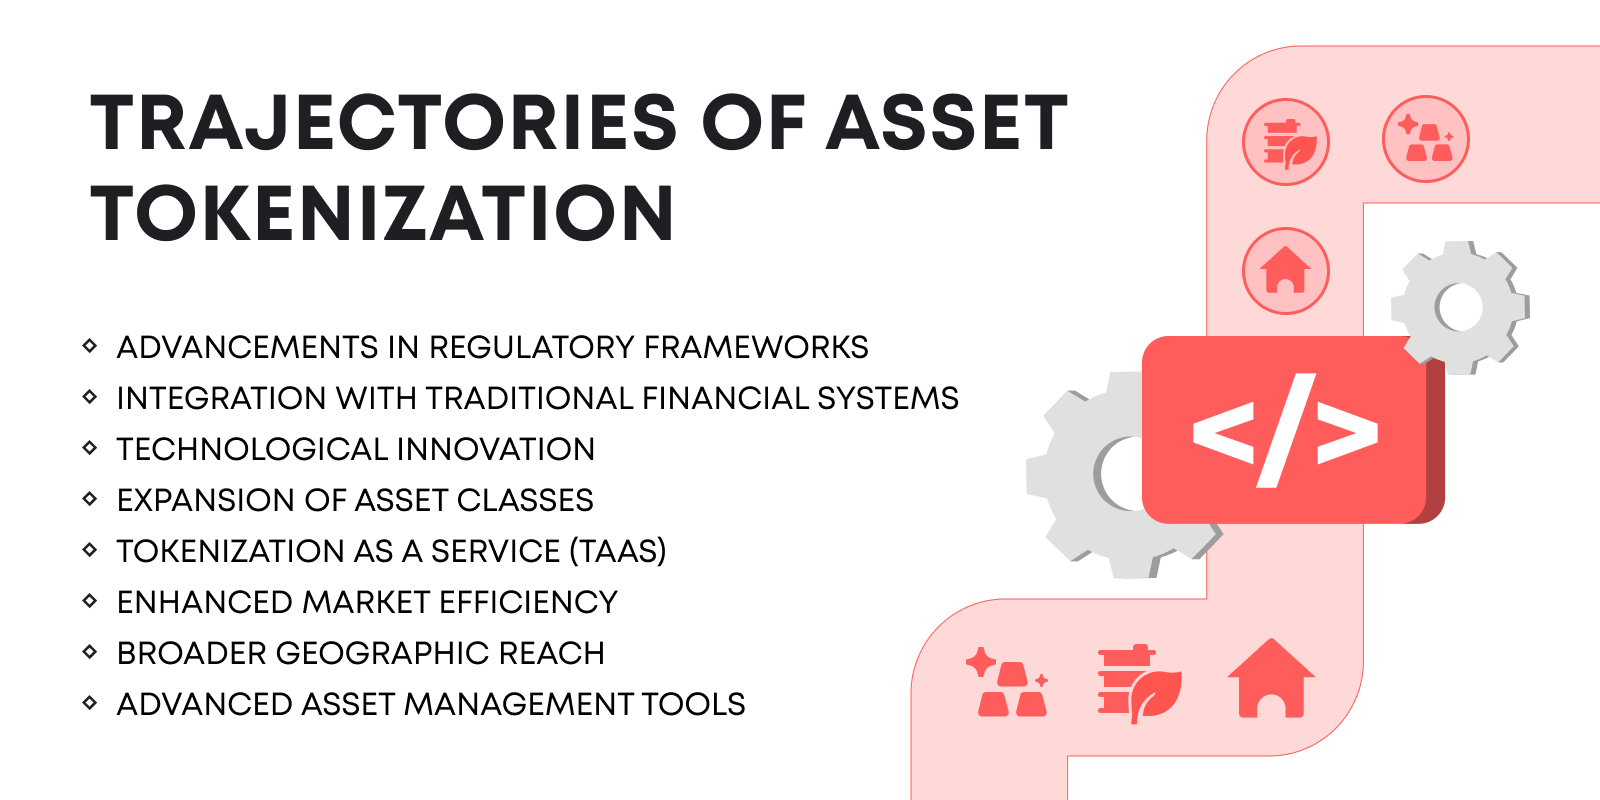 The potential trajectory for the tokenization of real-world assets is vast and multi-faceted.